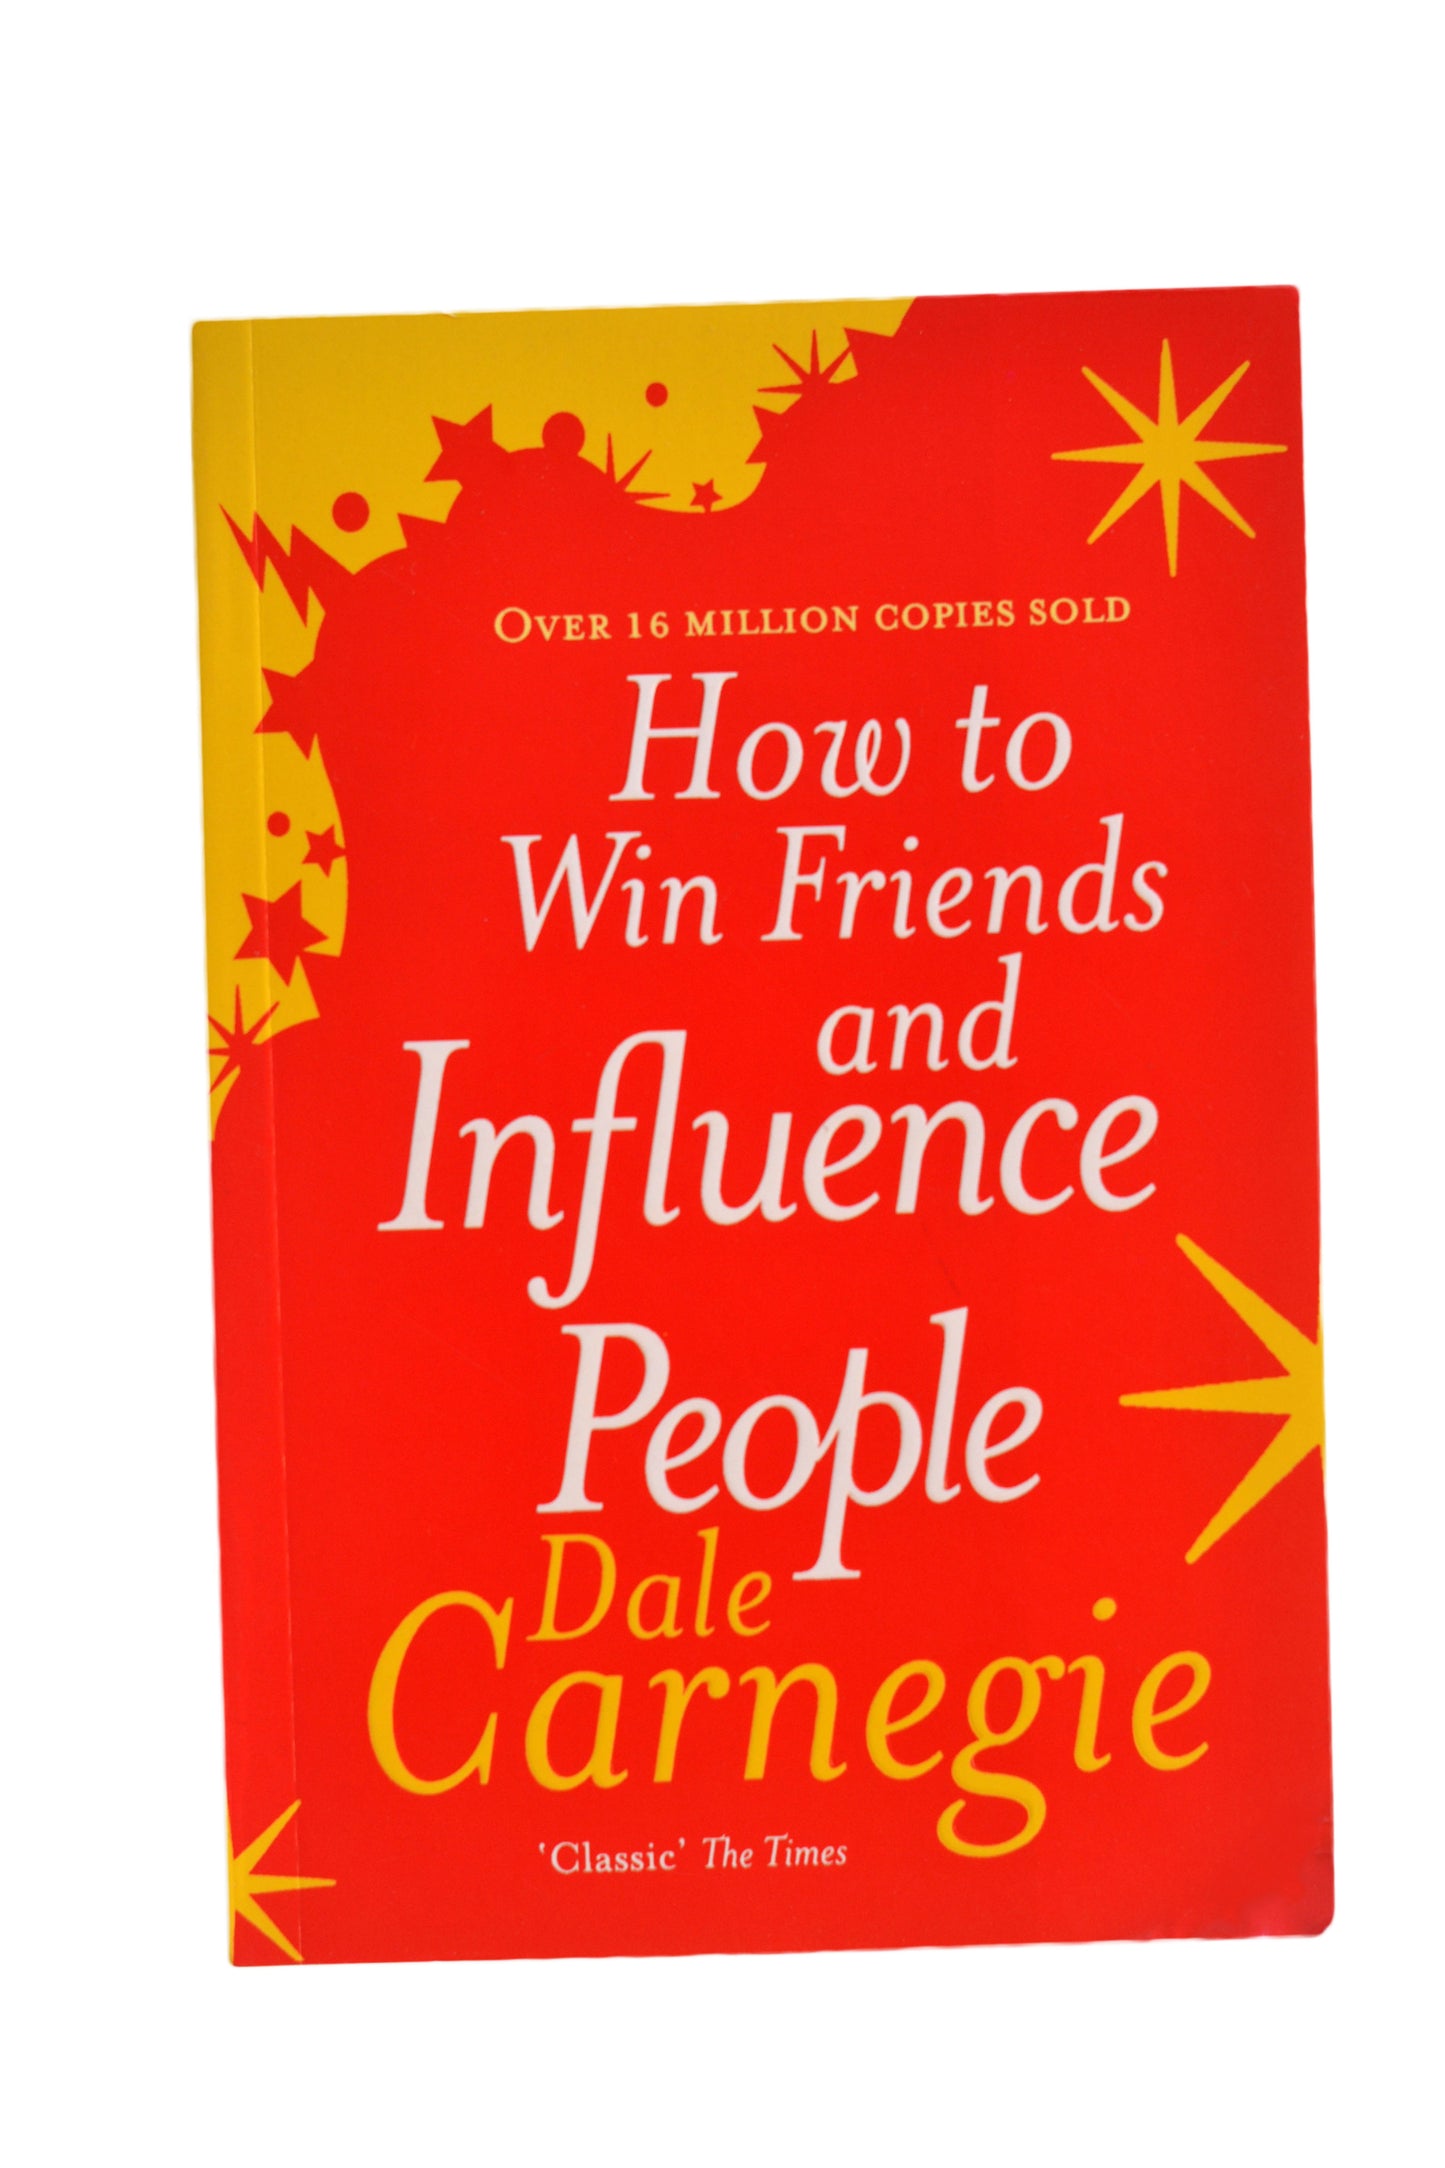 HOW TO WIN FRIENDS AND INFLUENCE PEOPLE by Dale Carnegie